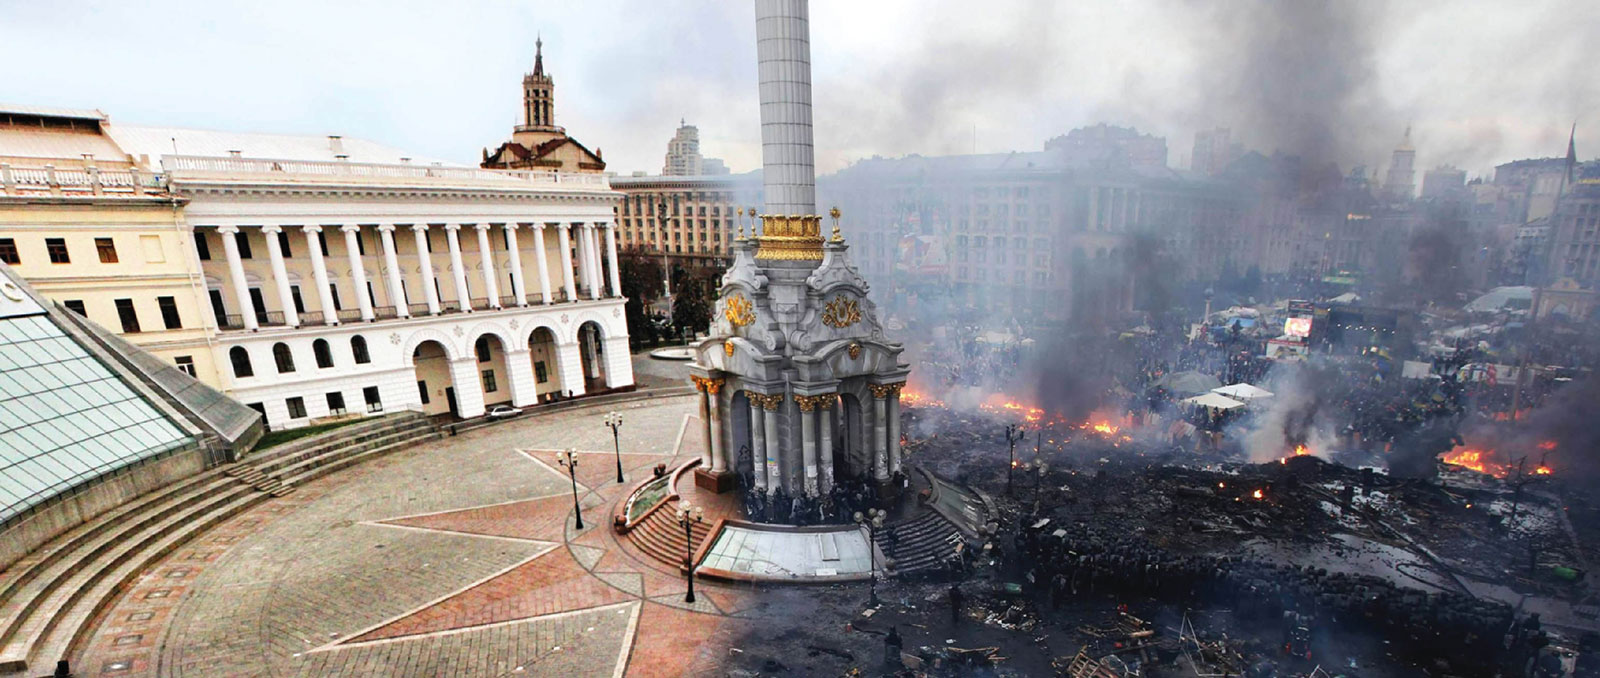 Kiev's Independence Square before and after the revolution. 2014